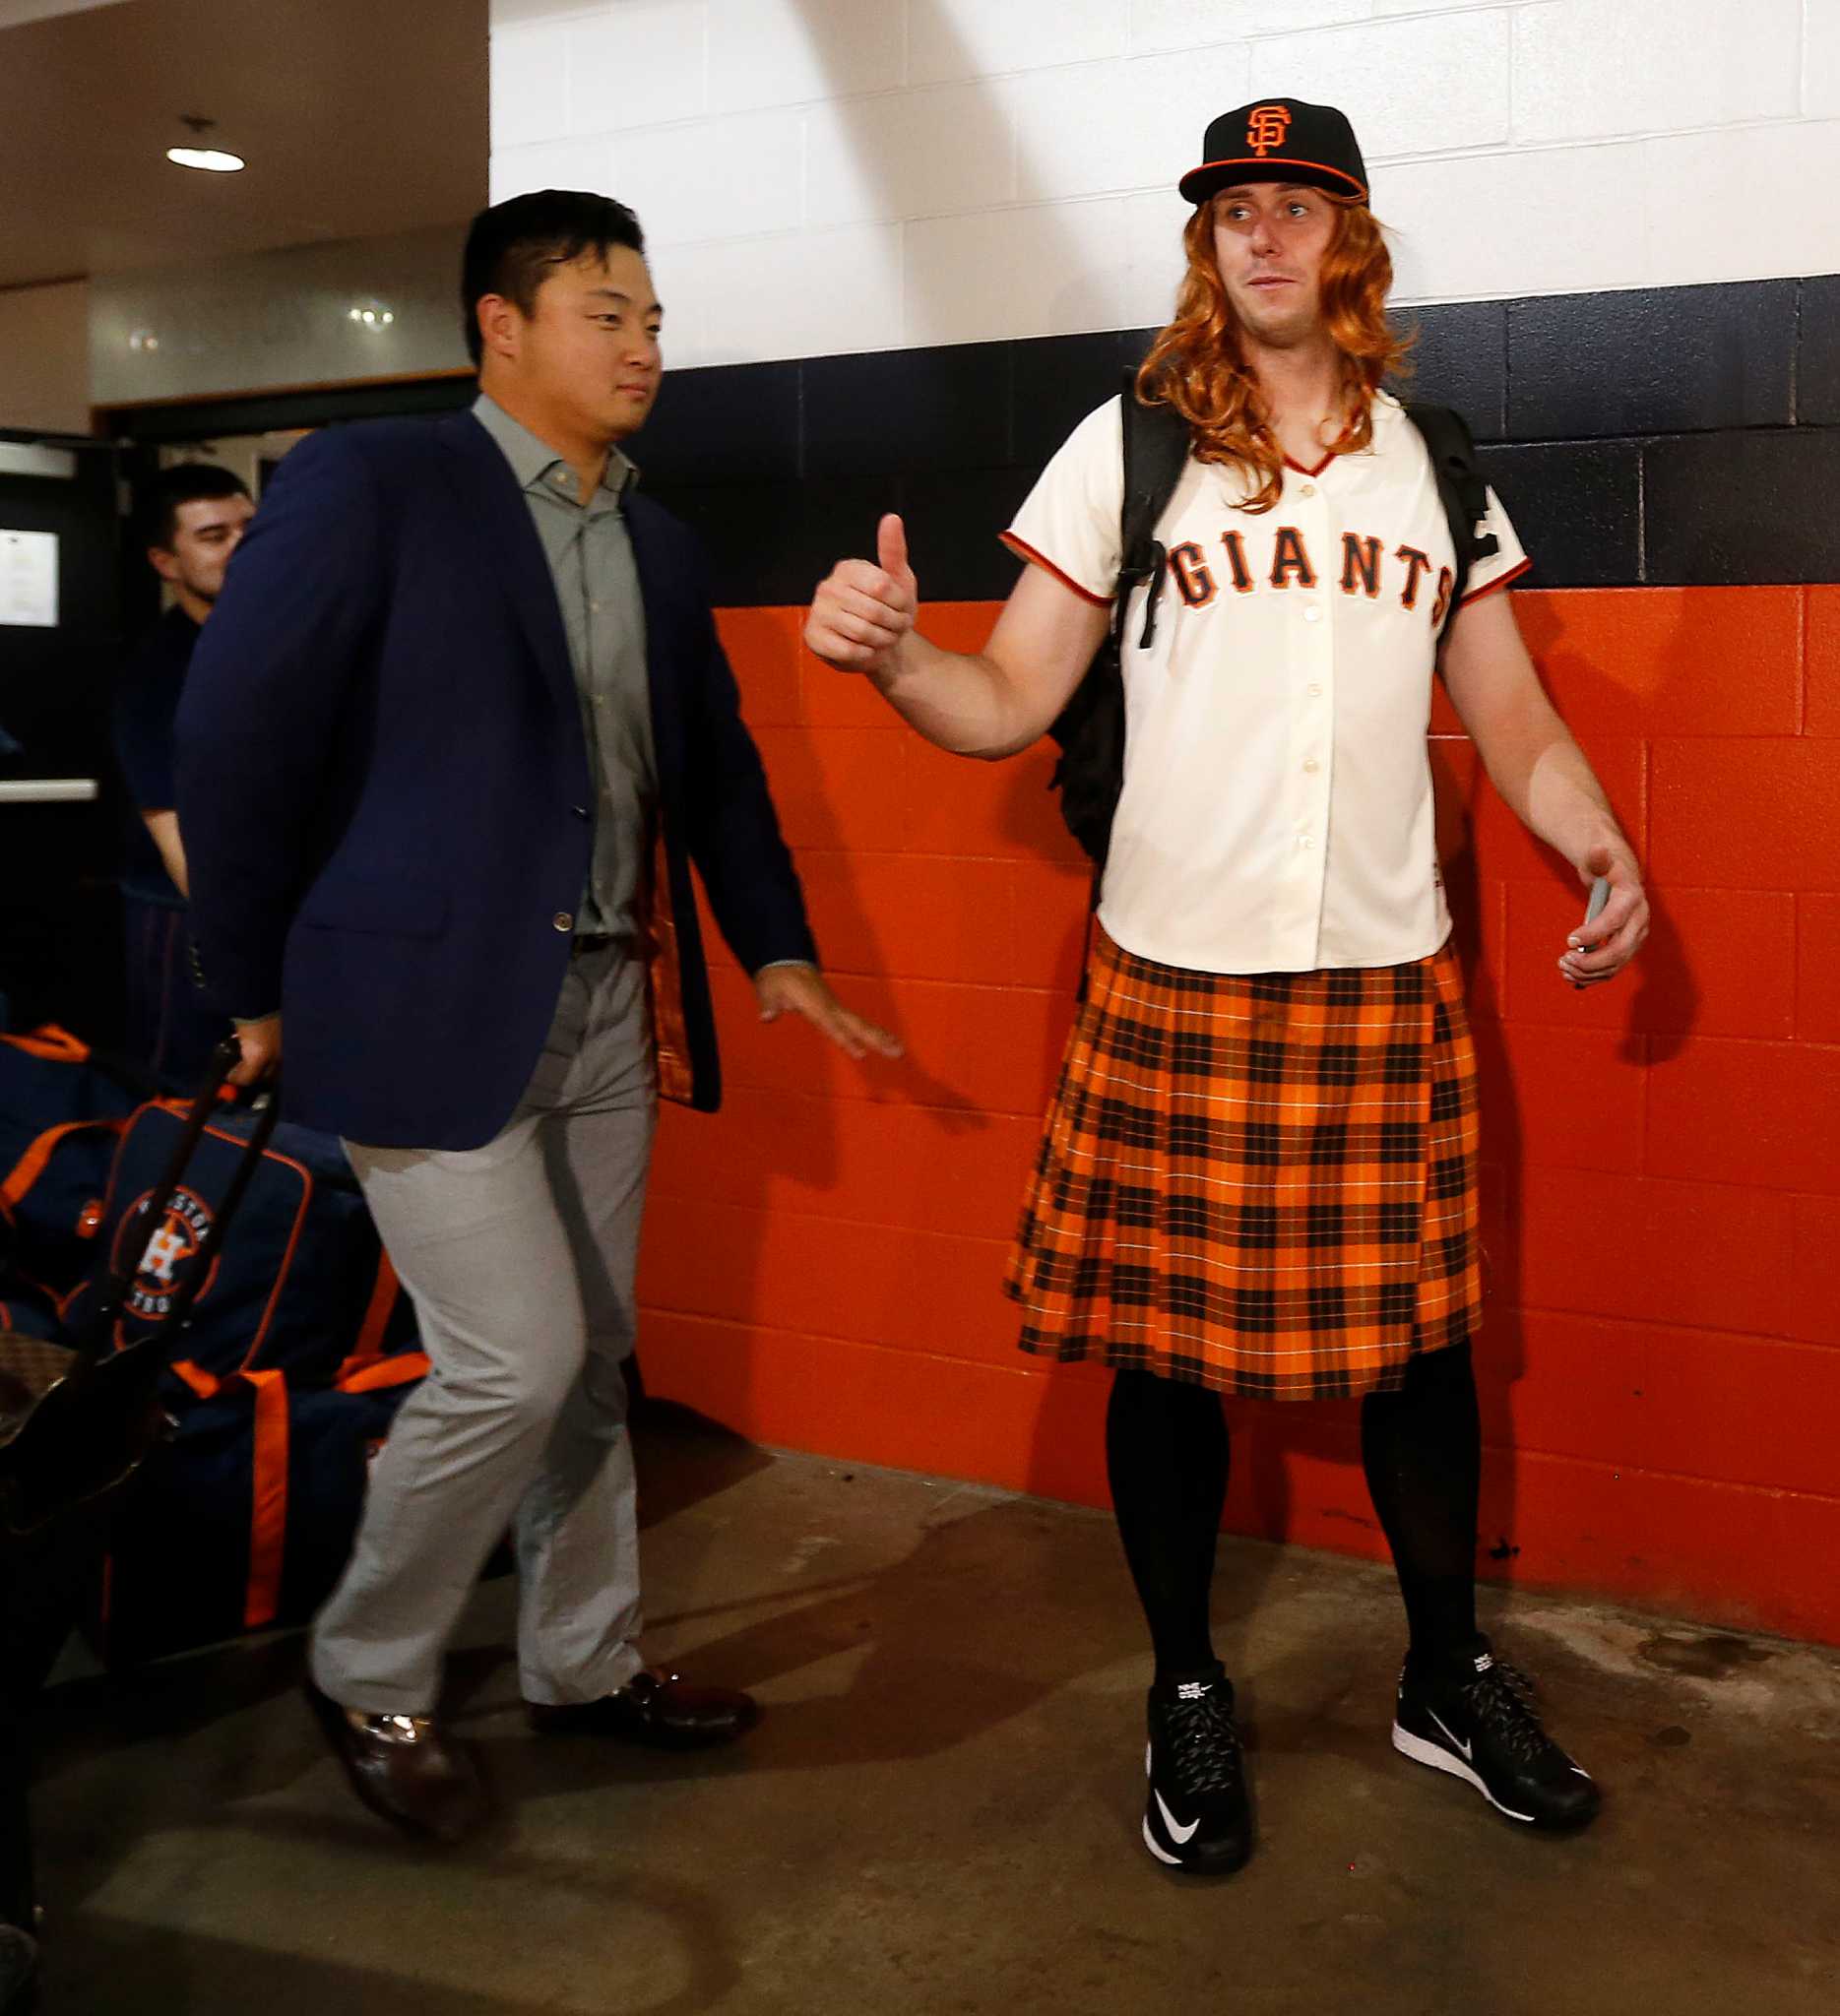 Check out the costumes Astros' rookies wore for their final road trip